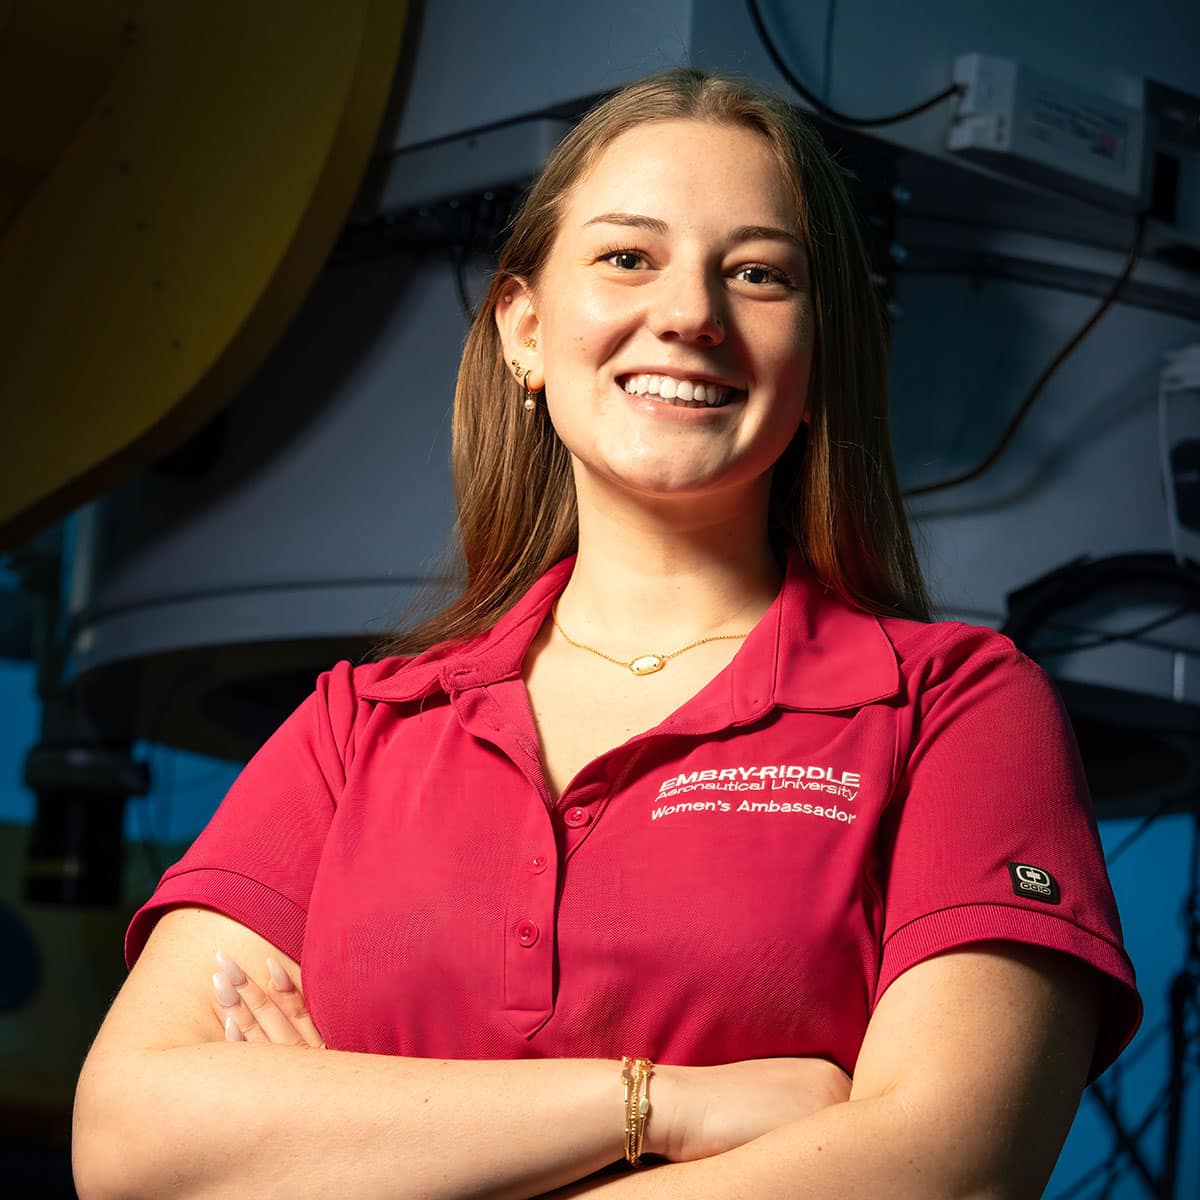 Logan, a white woman with dark blond hair pulled back, poses with her arms crossed, wearing a red polo shirt with the Embry-Riddle wordmark.